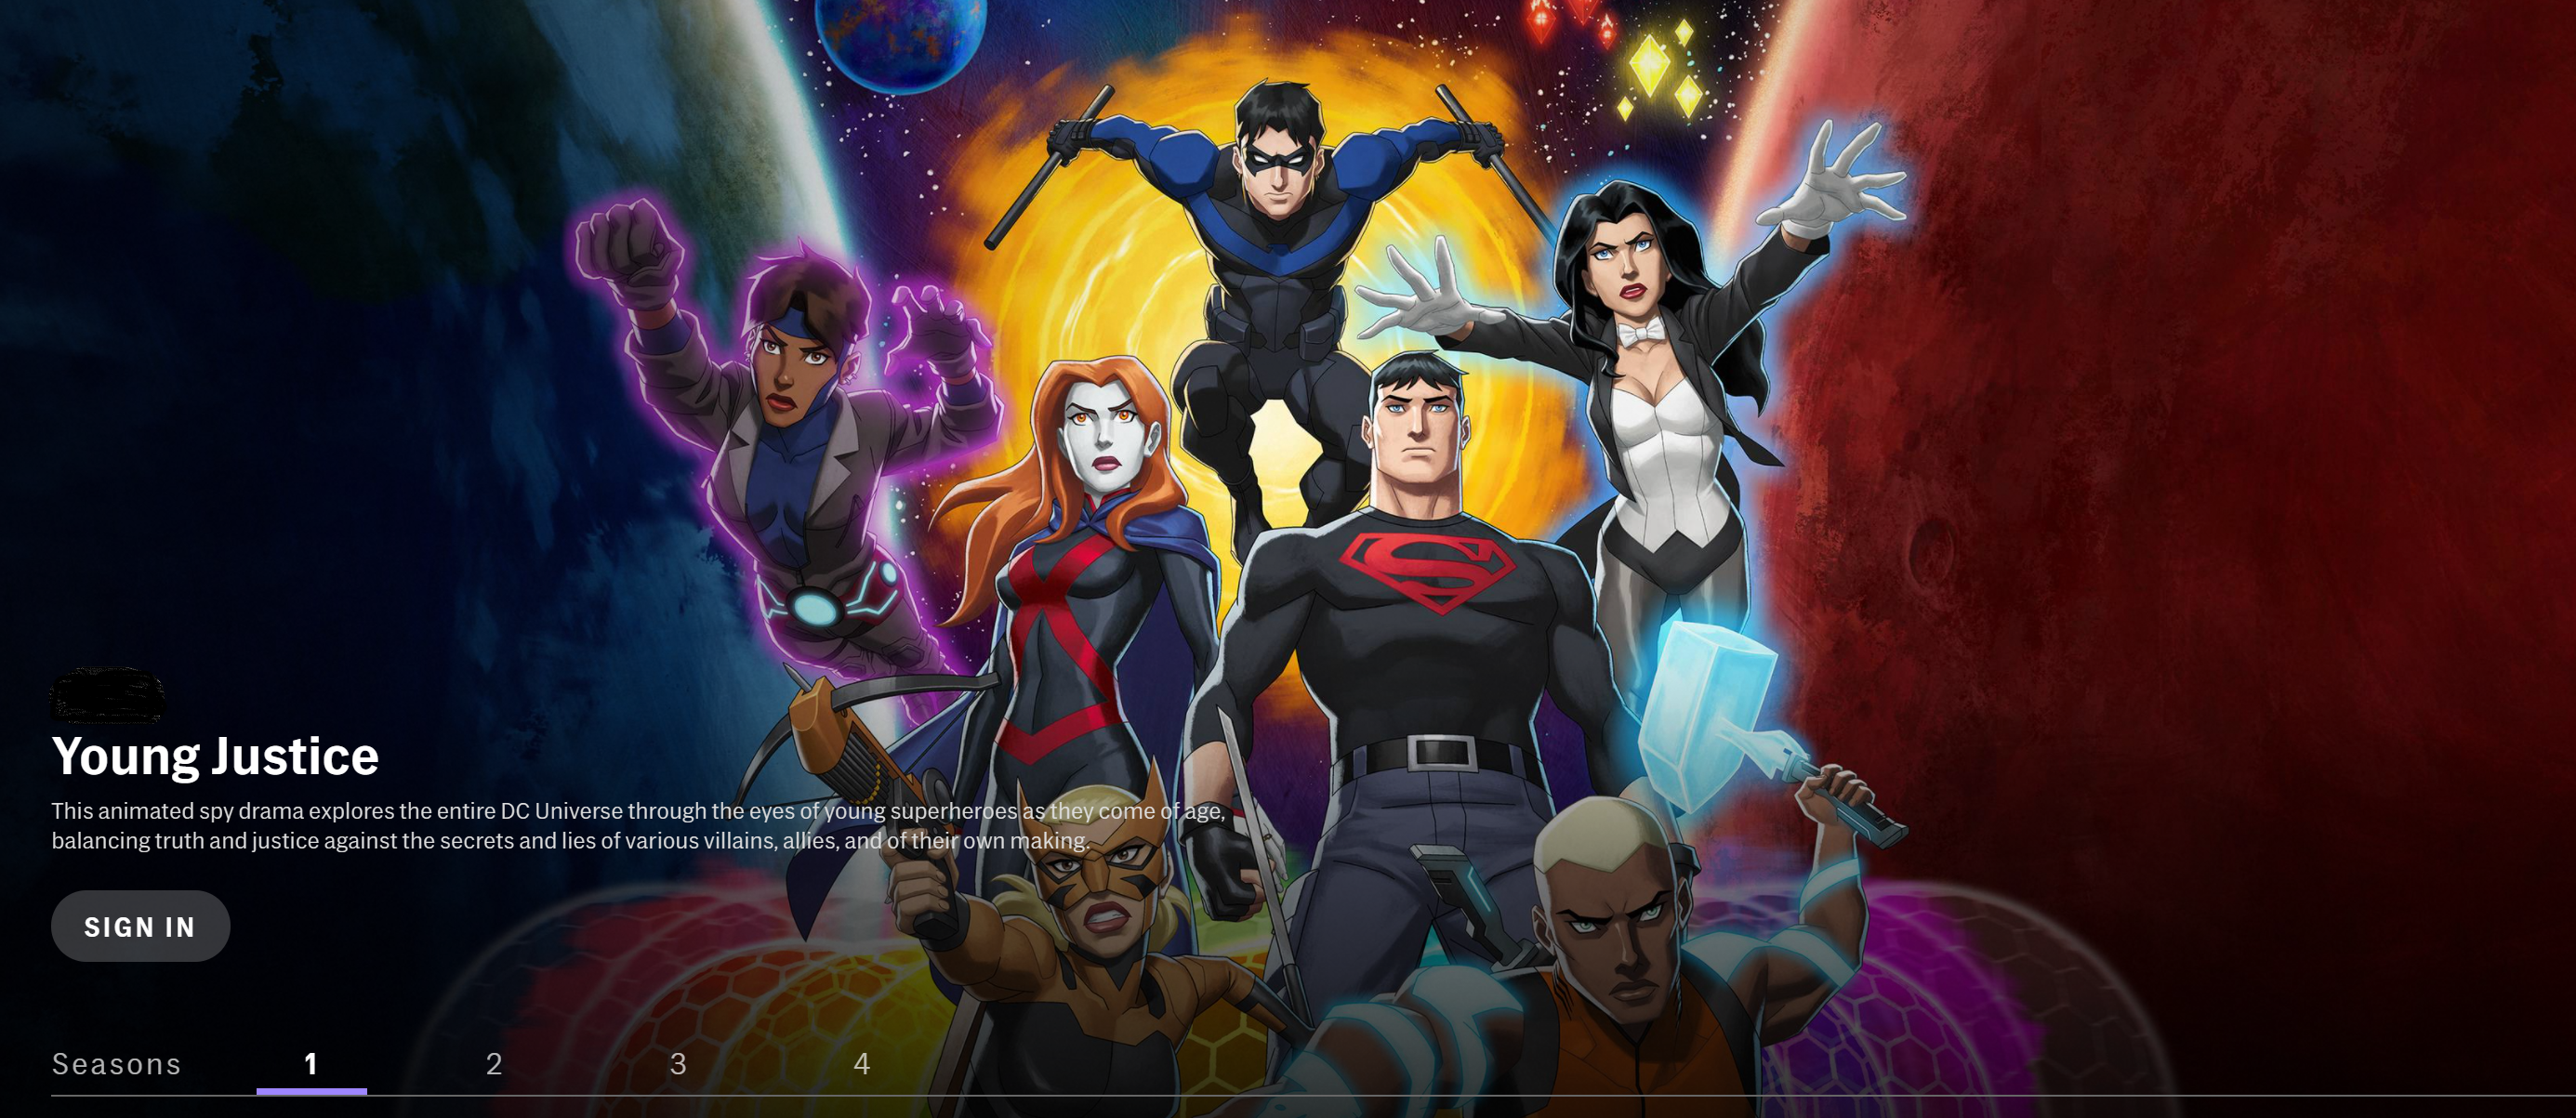 Young Justice on HBO in UK